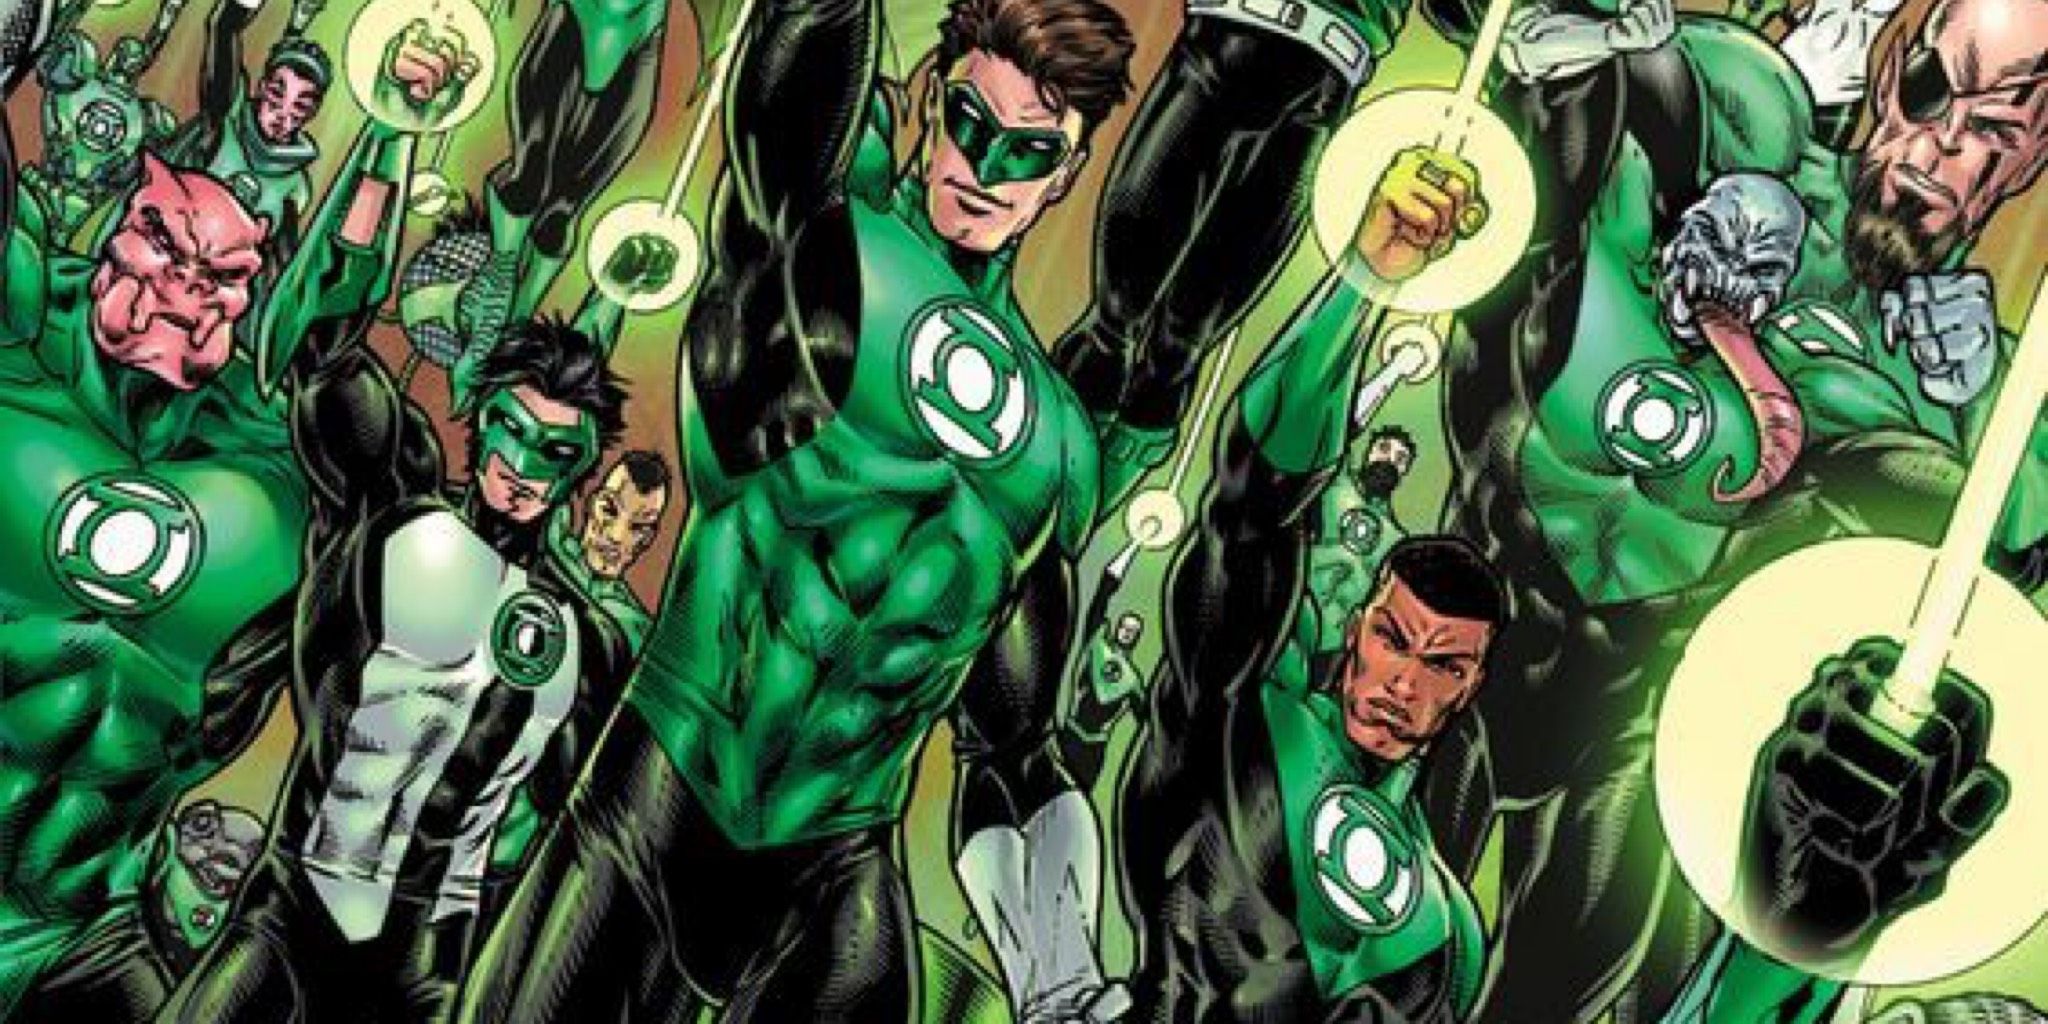 An image of Hal Jordan, Kyle Rayner, and other Green Lanterns from DC Comics